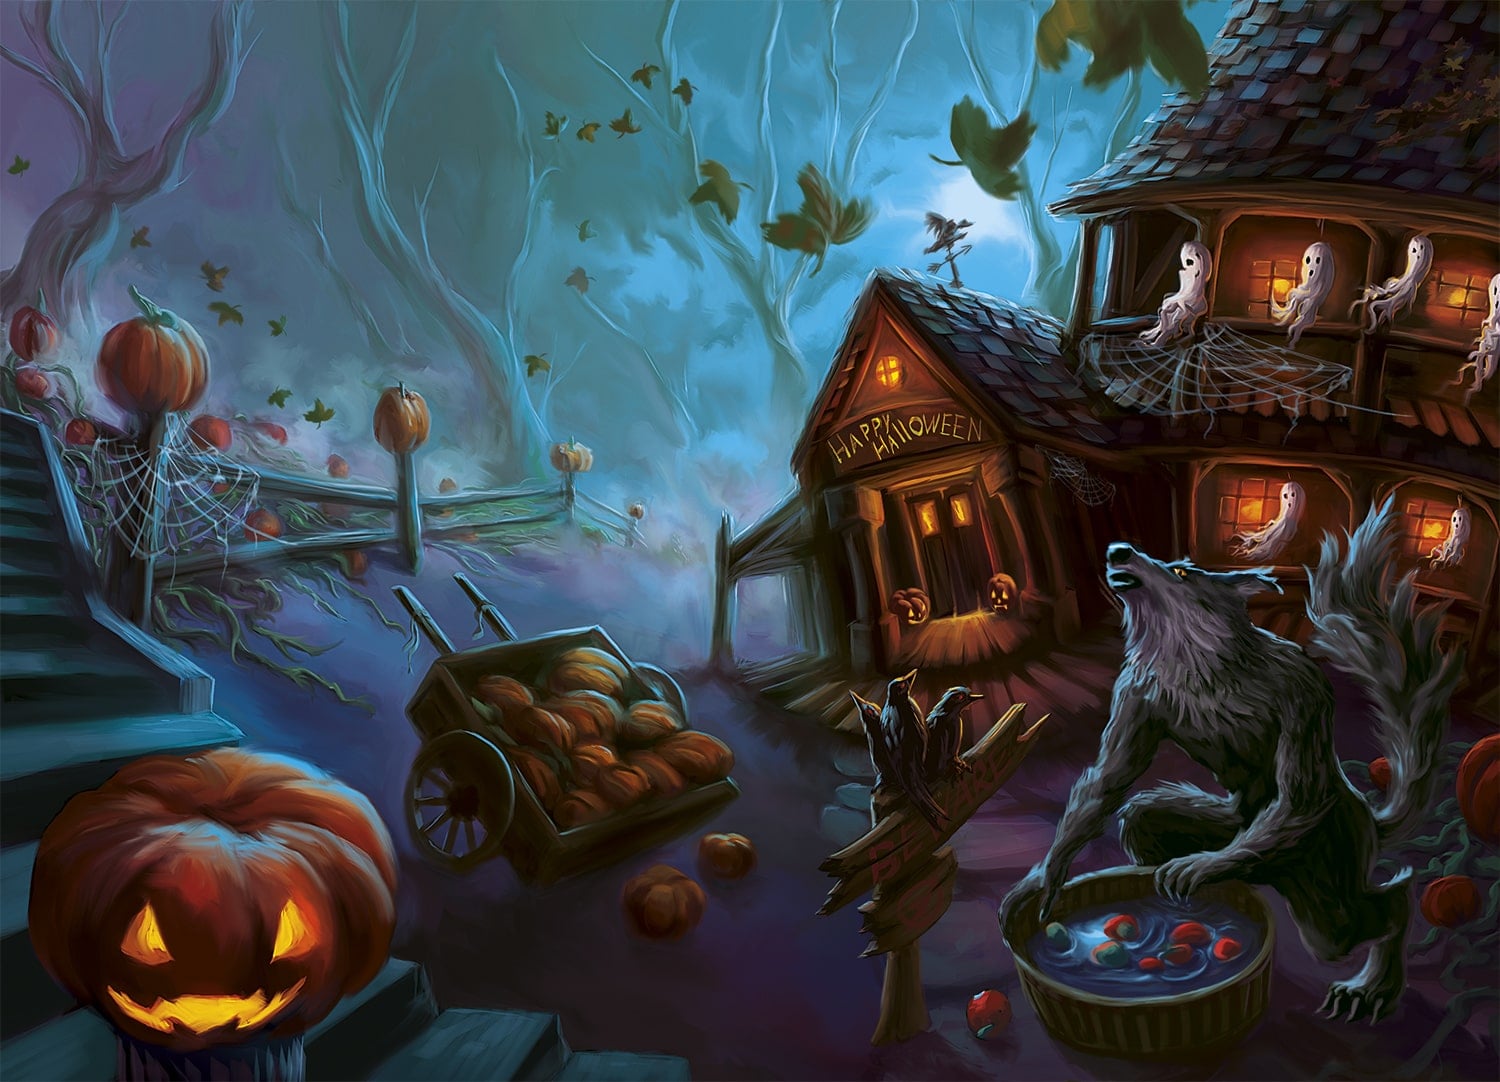 Werewolf Painting Halloween Illustration For Young Viewers 2 min